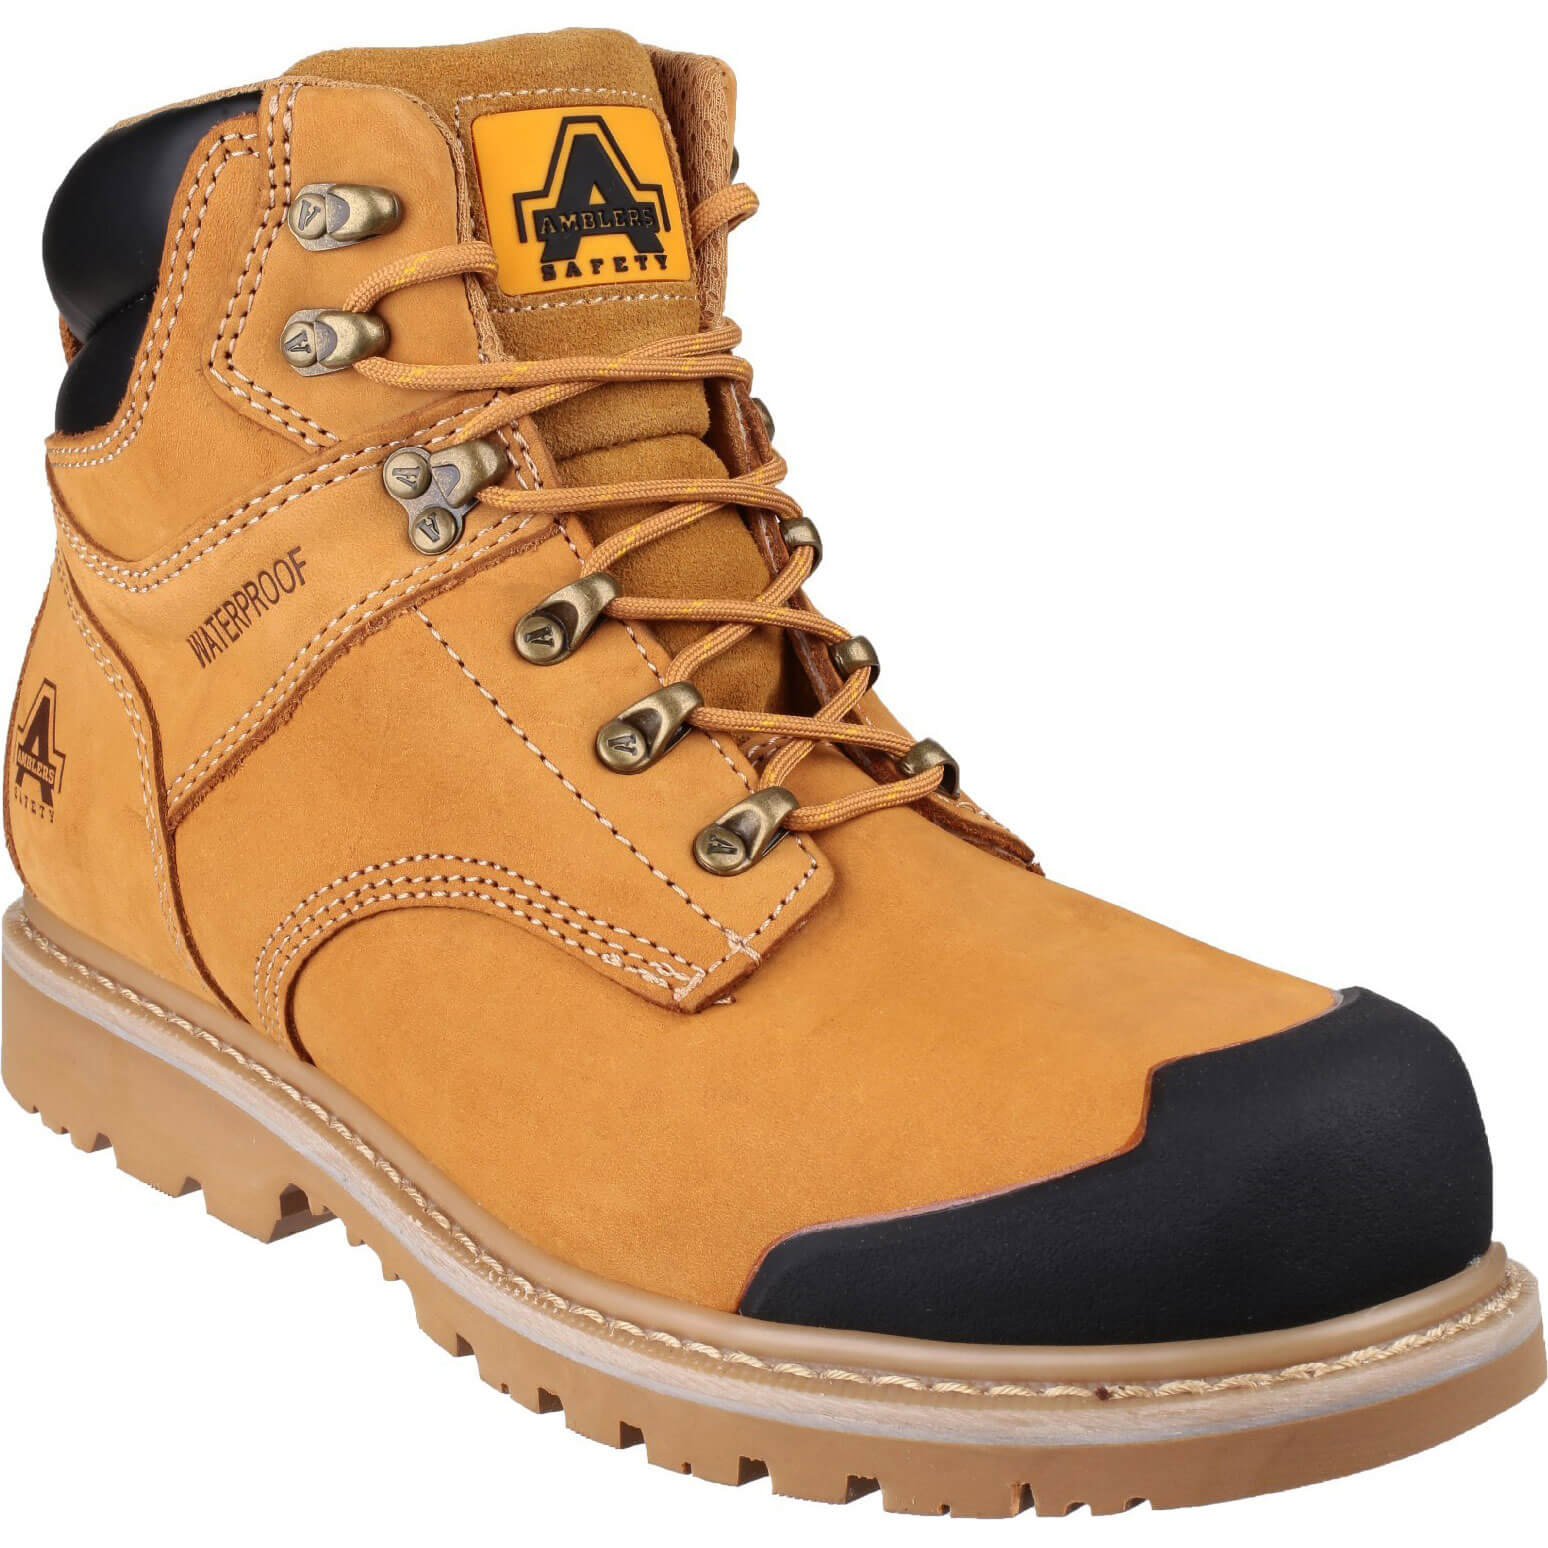 Photo of Amblers Mens Safety Fs226 Goodyear Welted Waterproof Industrial Safety Boots Honey Size 7